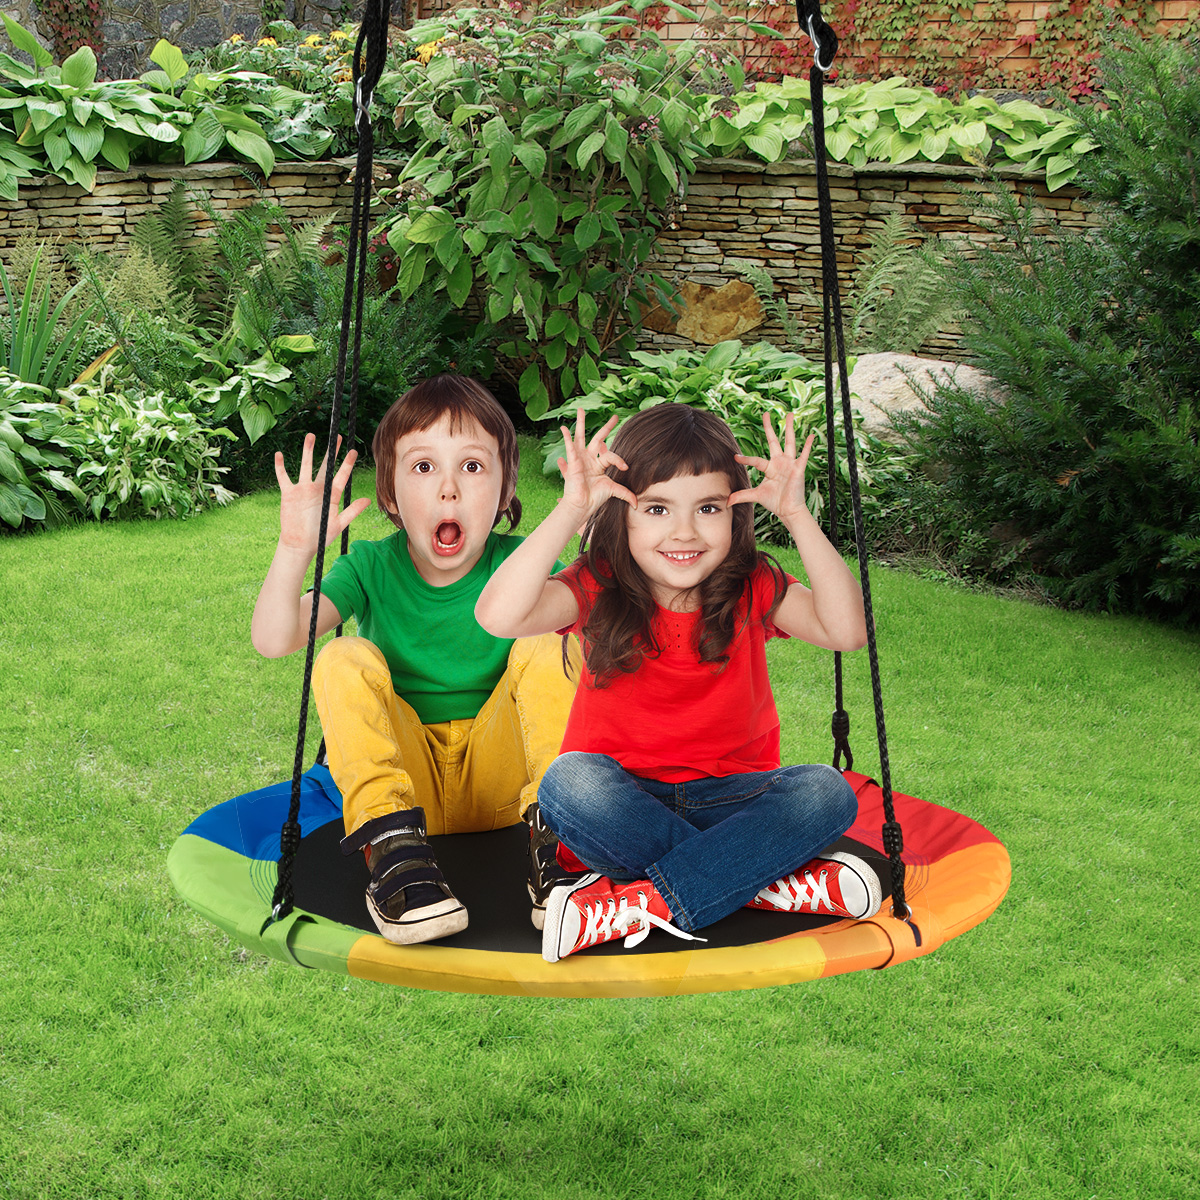 Goplus 40" Flying Saucer Tree Swing Indoor Outdoor Play Set Swing for Kids colorful - image 2 of 10